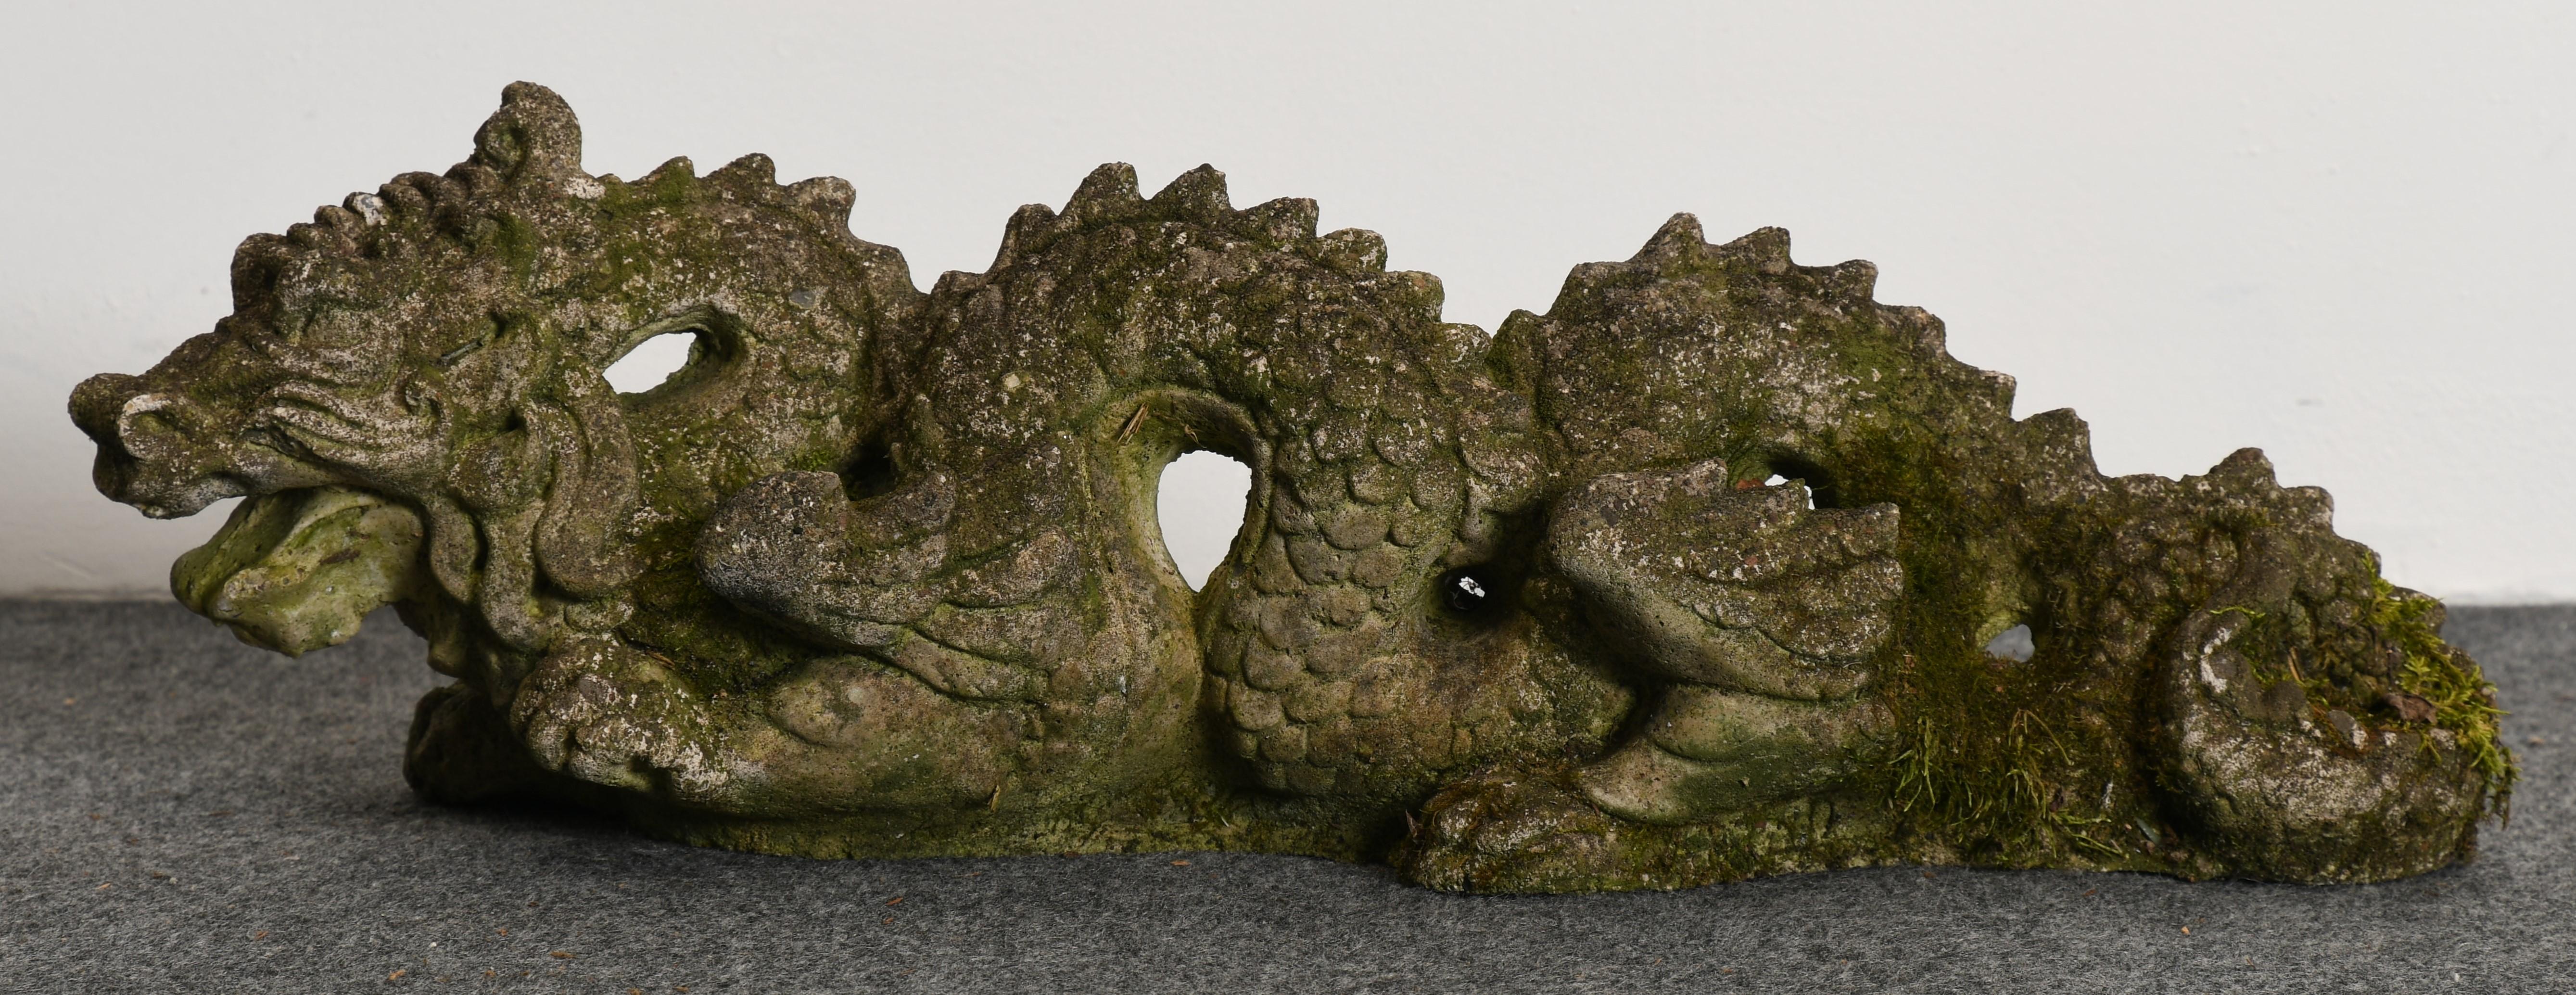 An ornamental cast stone dragon garden statue with great character and patina. This dragon is from a local Pennsylvania estate and would look good in any garden setting. New special pricing down from $450.00. Please ask about a personalized shipping